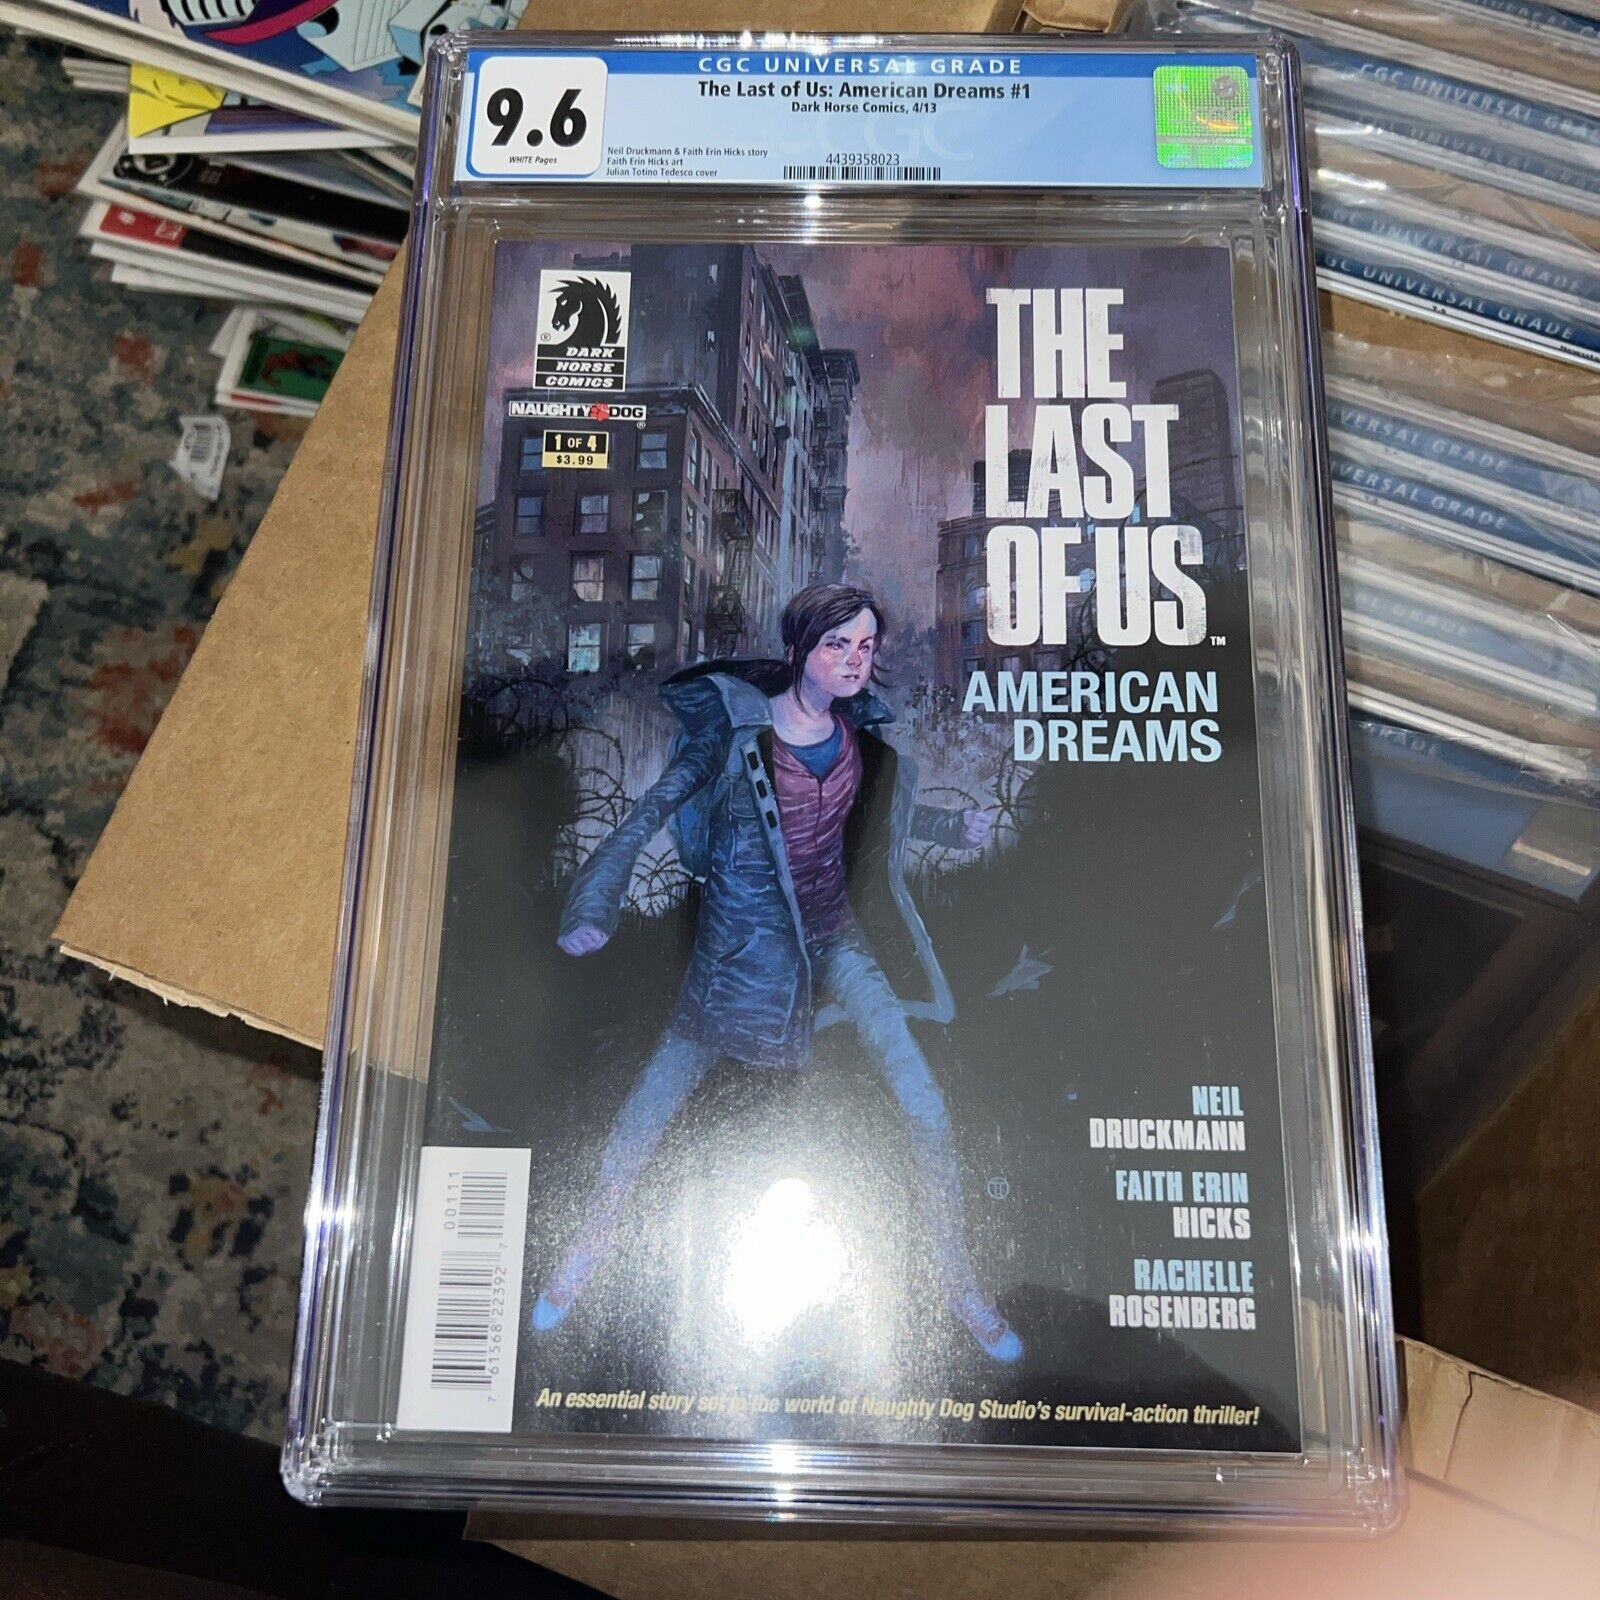 The Last of US: American Dreams #1 - CGC 9.6 - First Print - Hot Low Print Rare